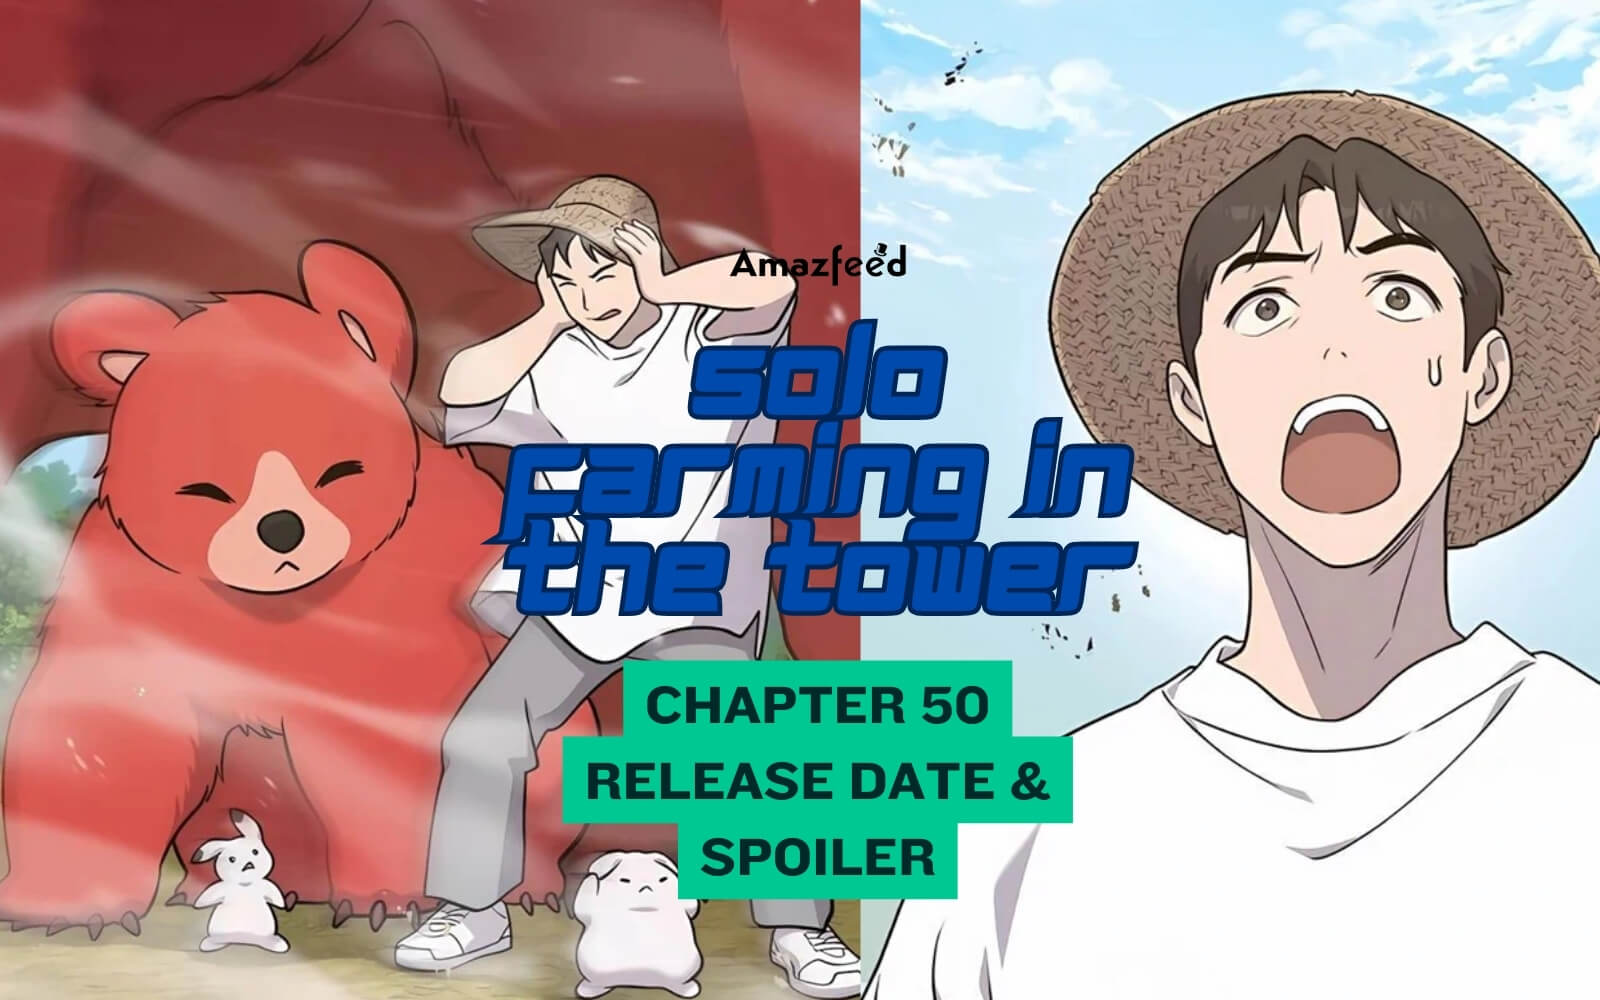 Solo Farming In The Tower Chapter 50 title poster